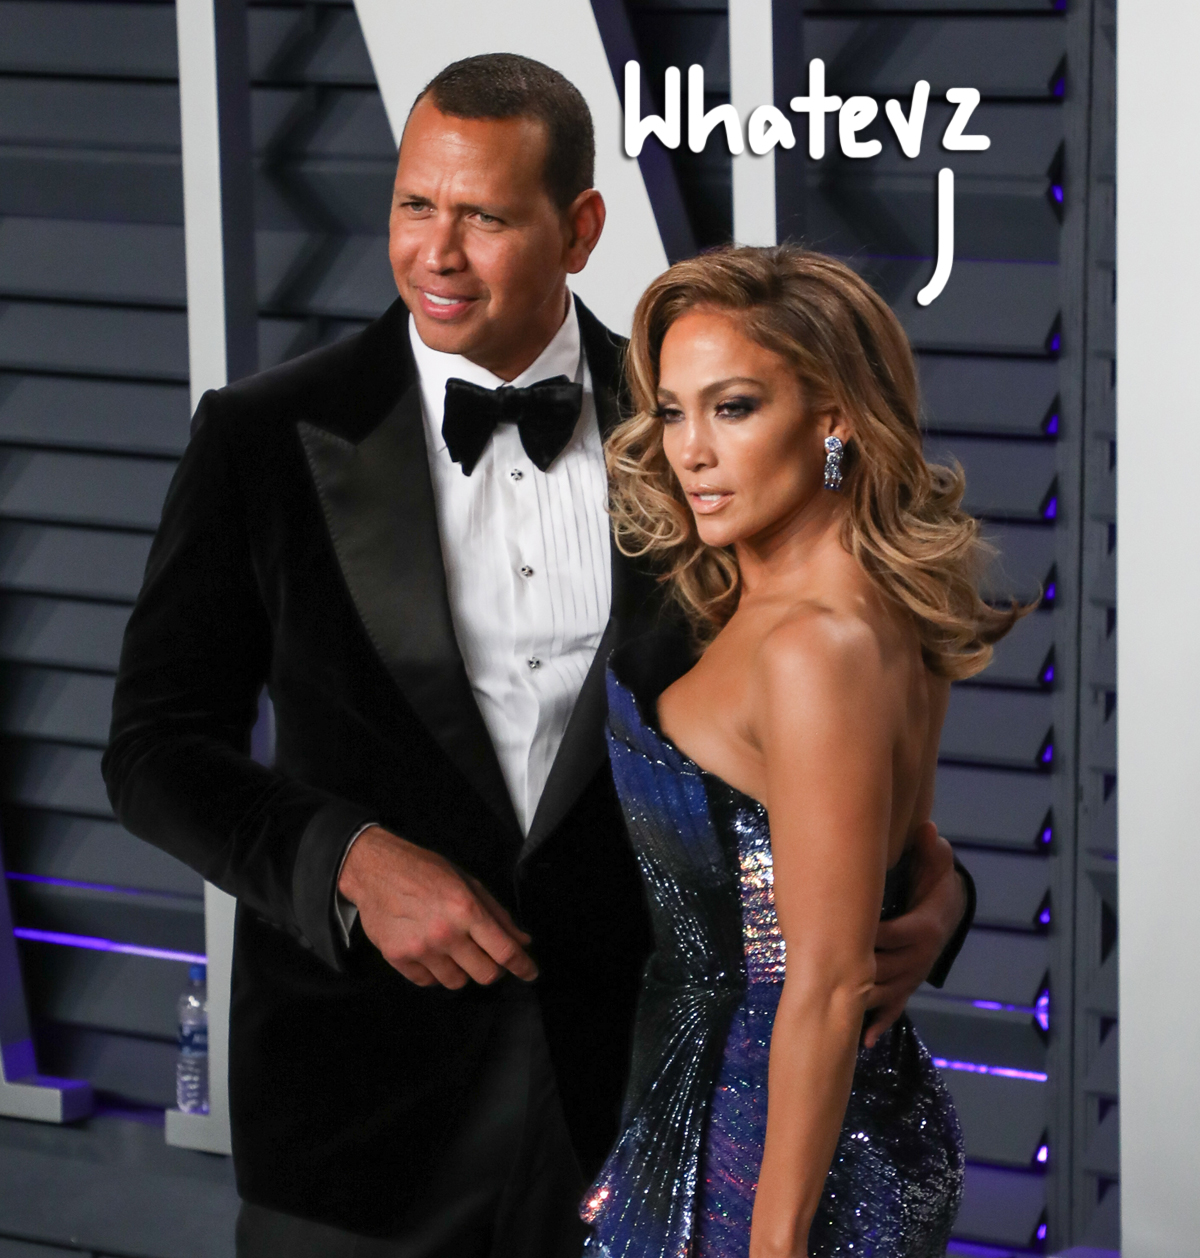 Jose Canseco Accuses A-Rod of Cheating on Jennifer Lopez